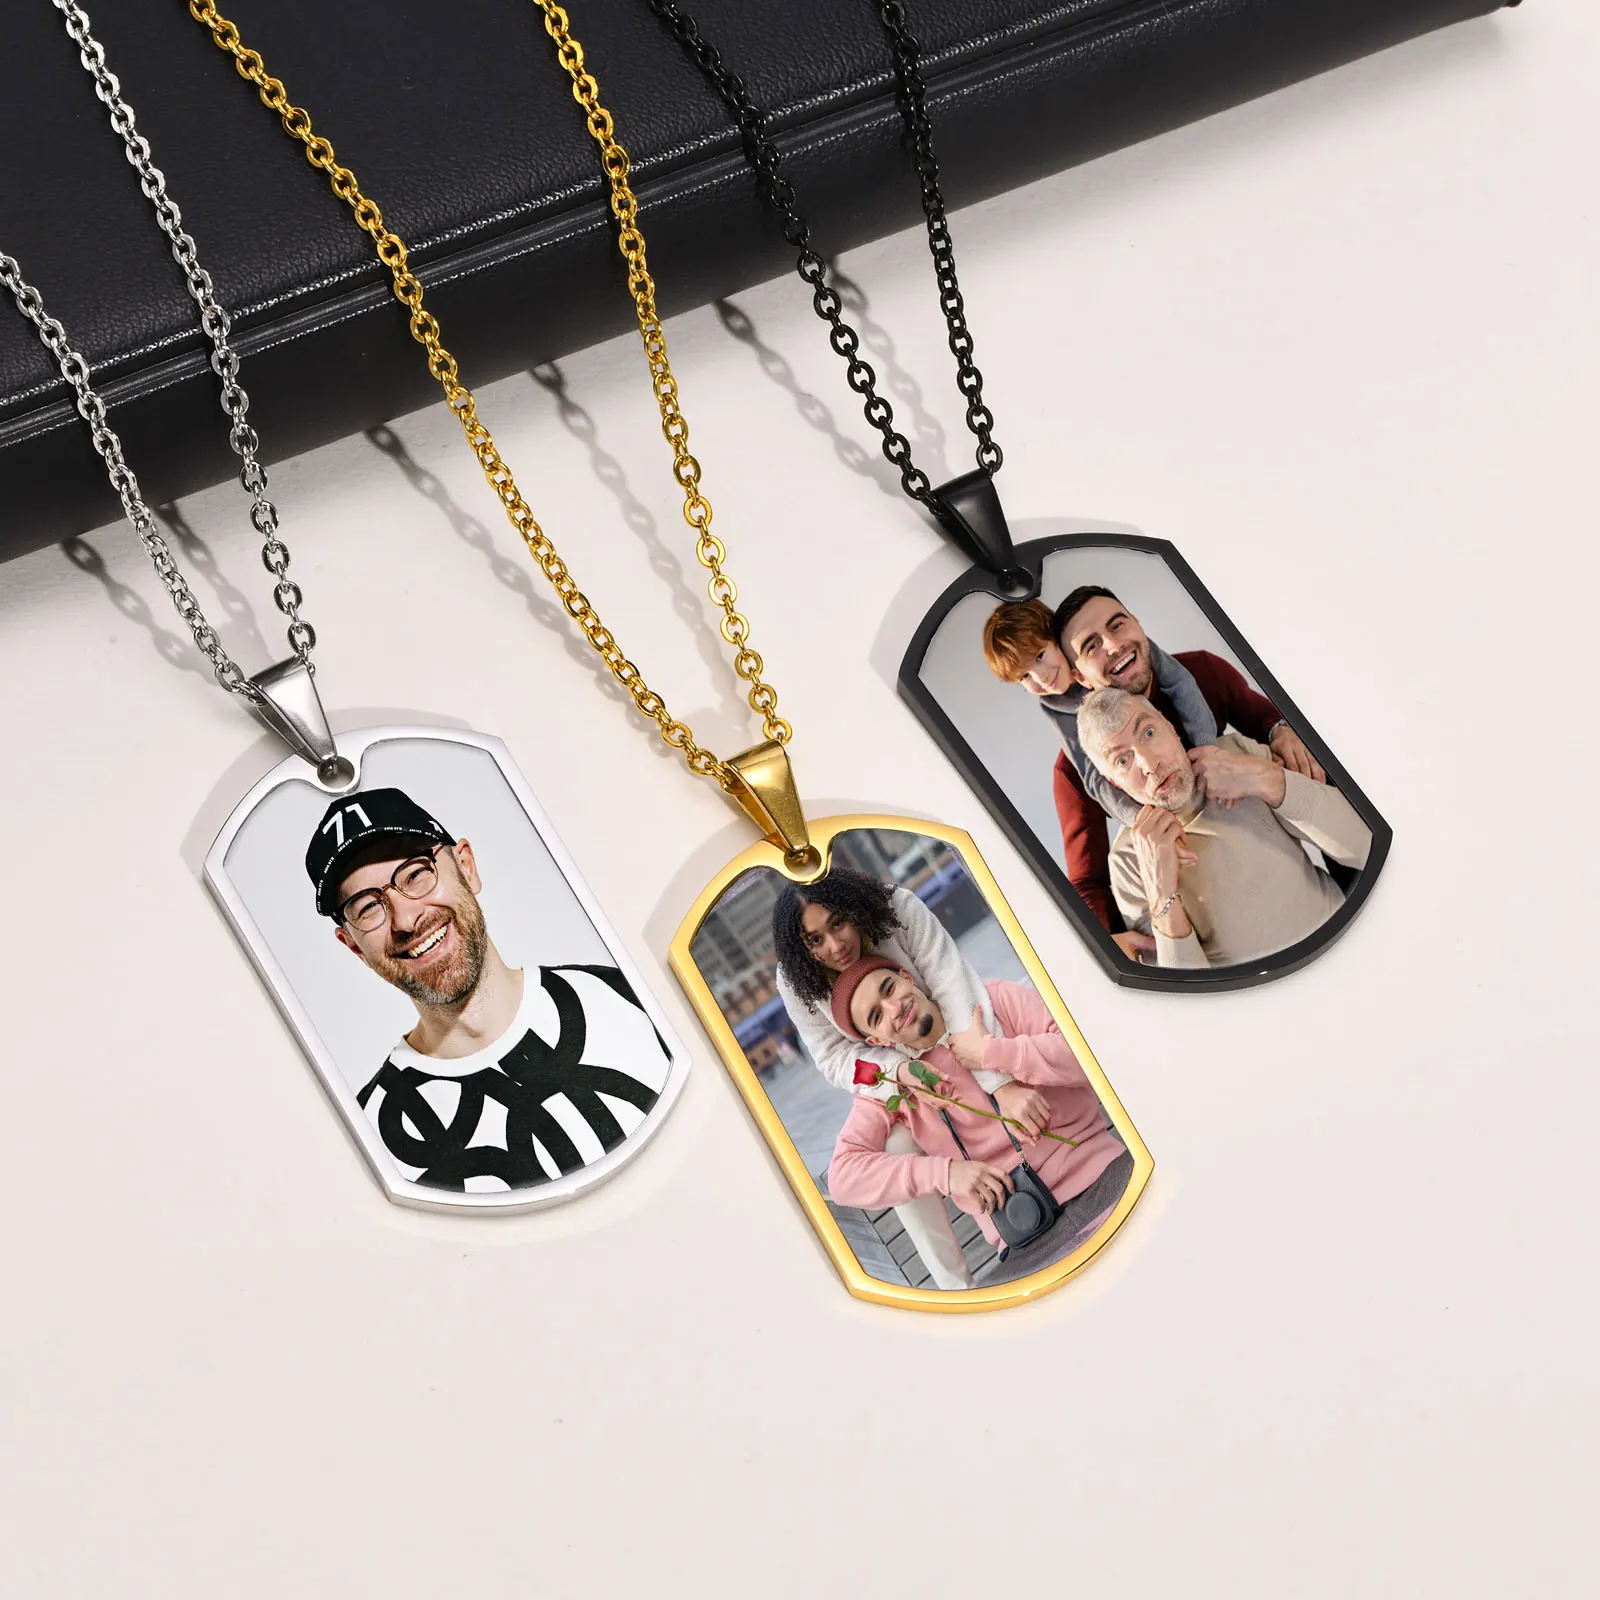 Men Personalize Engrave Name Custom The Photo of Family Pendant Necklaces,Picture Words Date Pendant Dogtag,Love Keepsake Gifts key words for insurance mp3 cd cef level в1